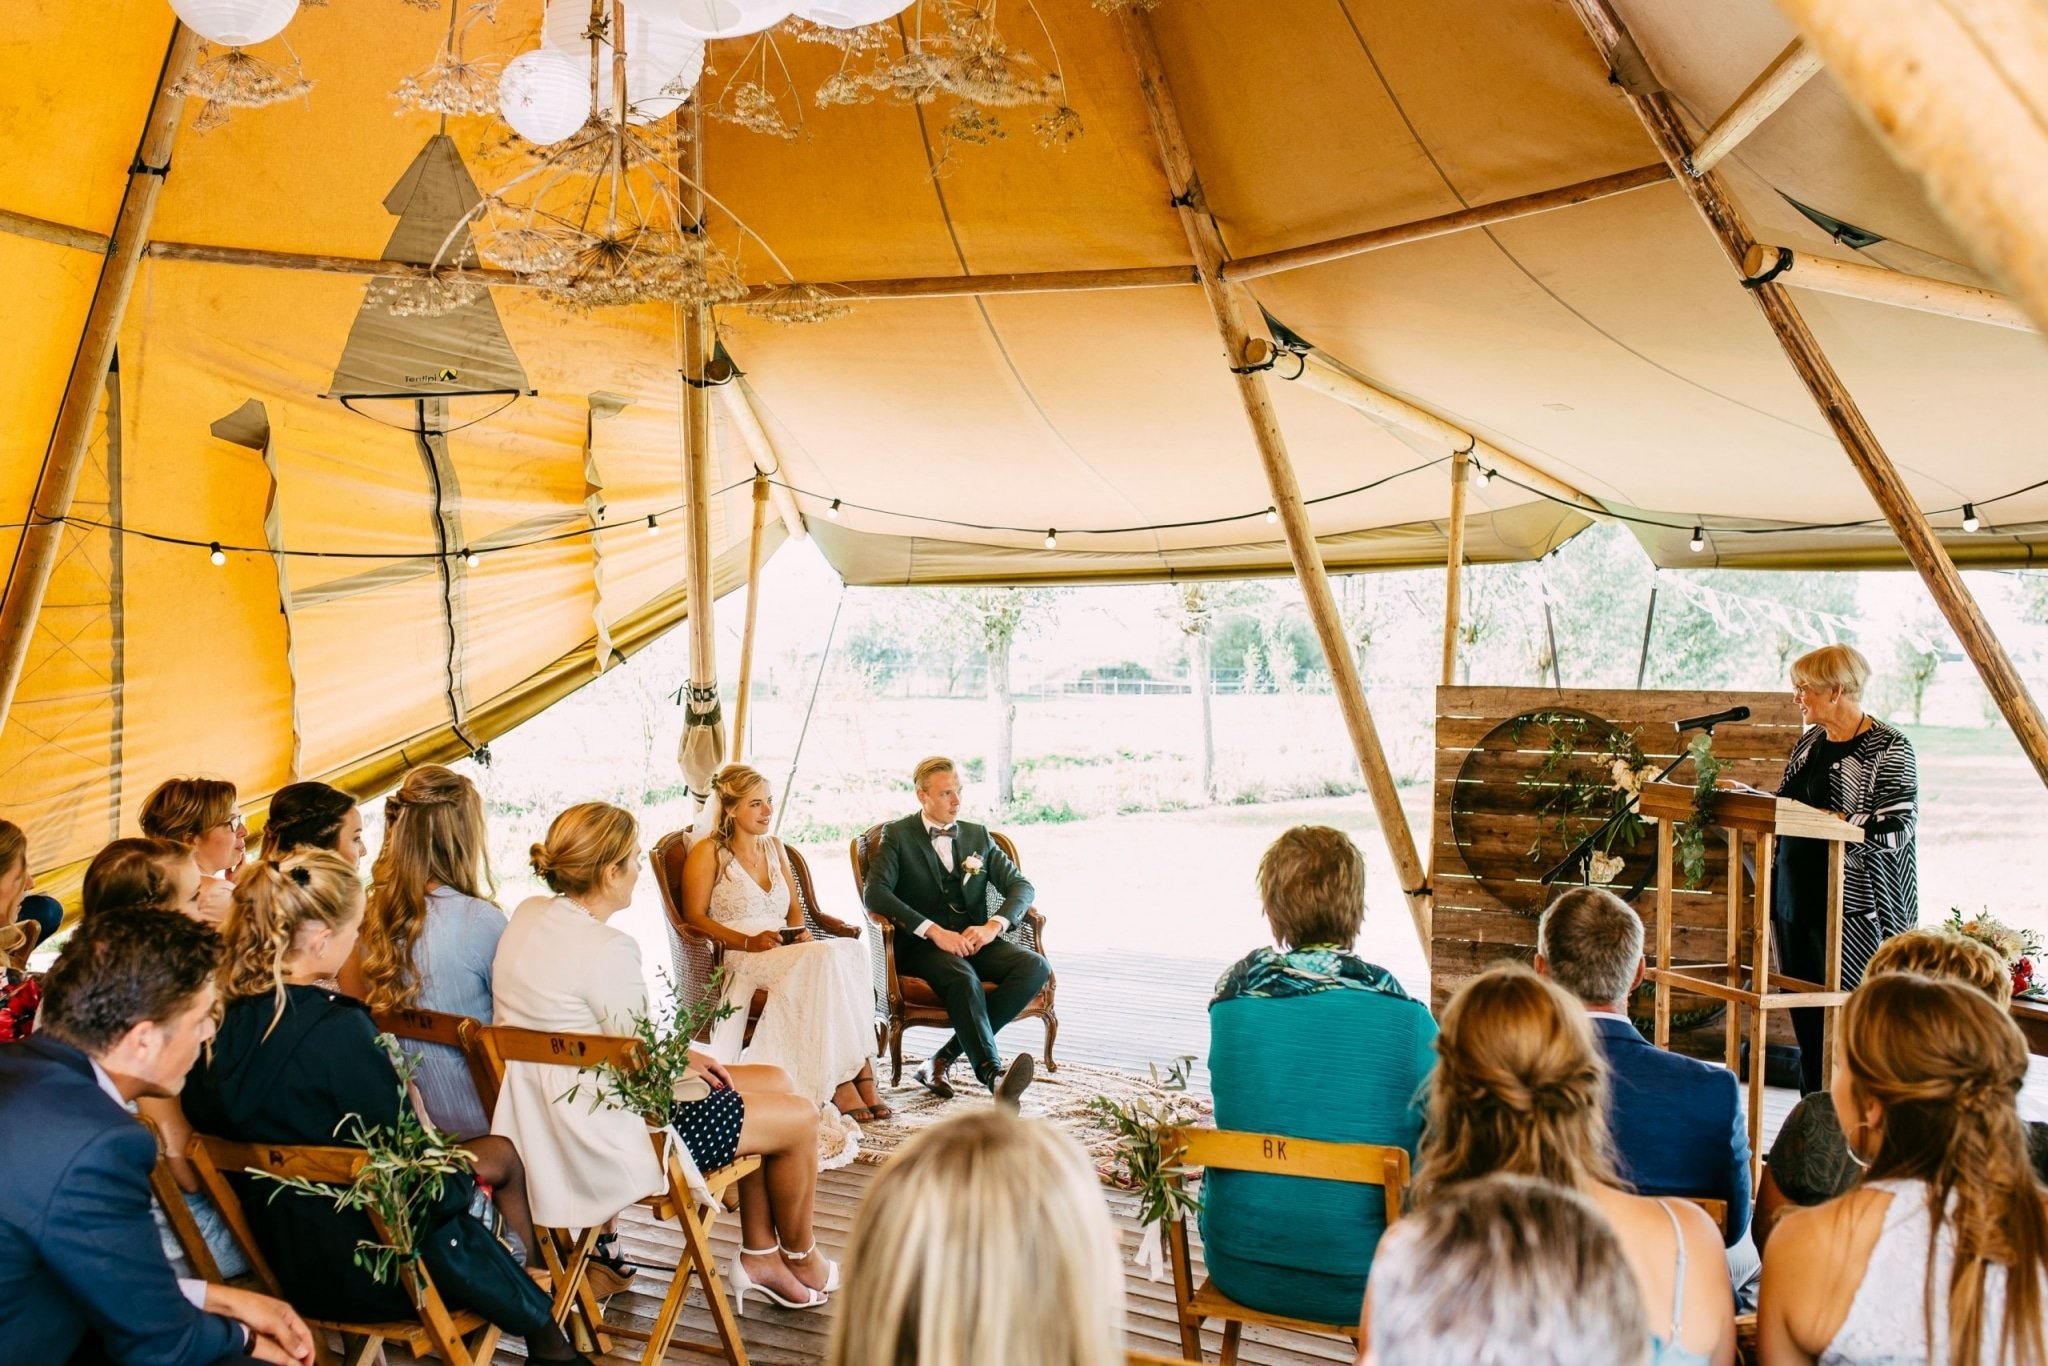 A wedding ceremony in a tipi tent.